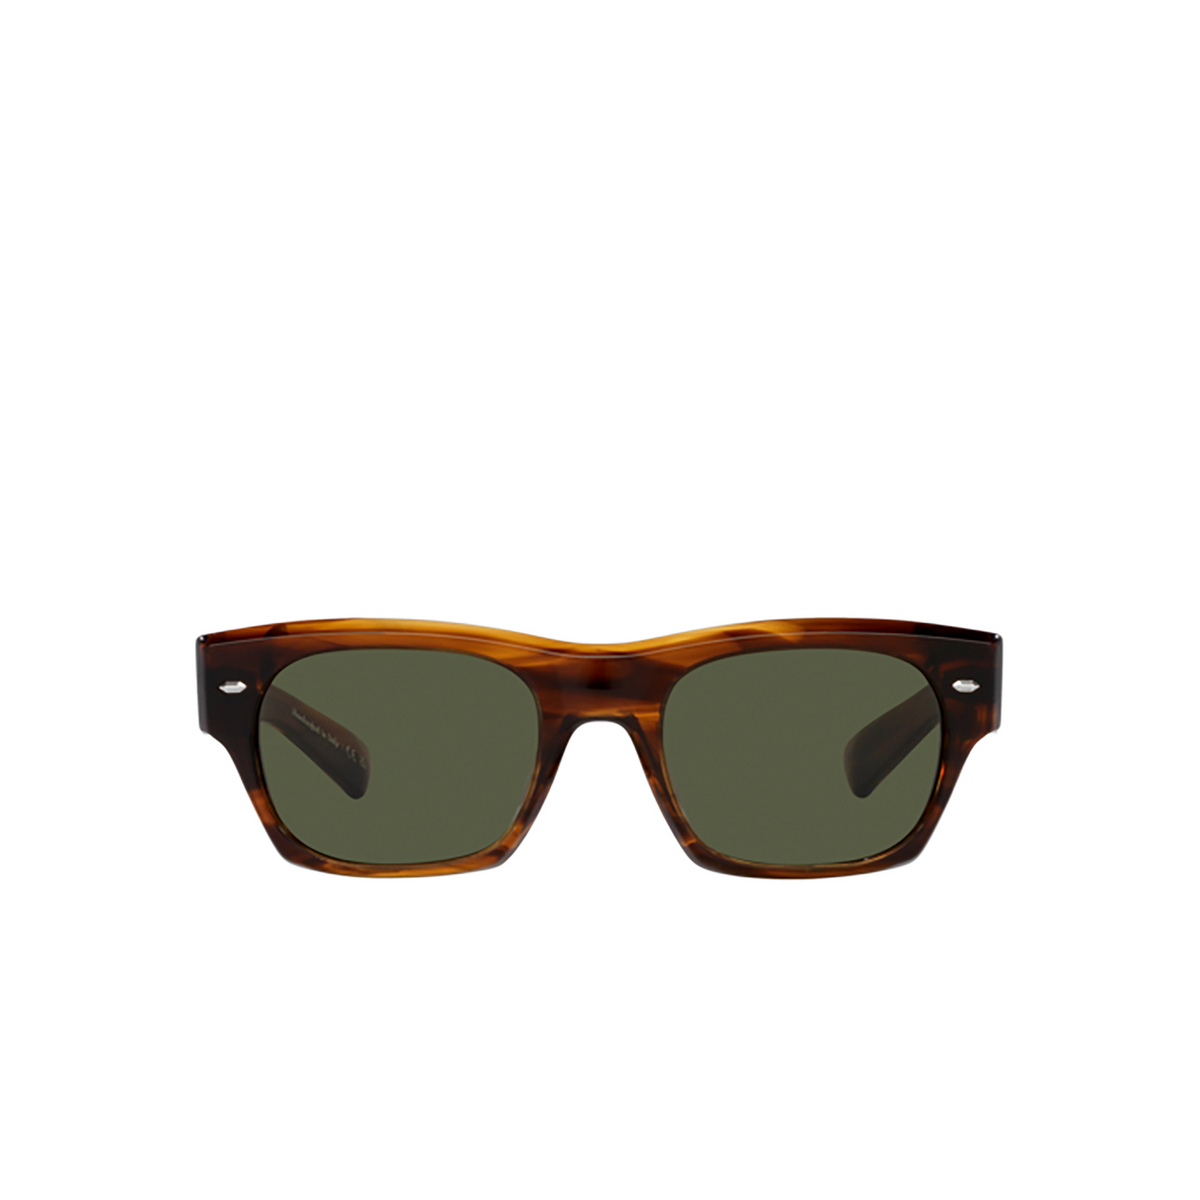 Oliver Peoples KASDAN Sunglasses 172452 Tuscany Tortoise - front view